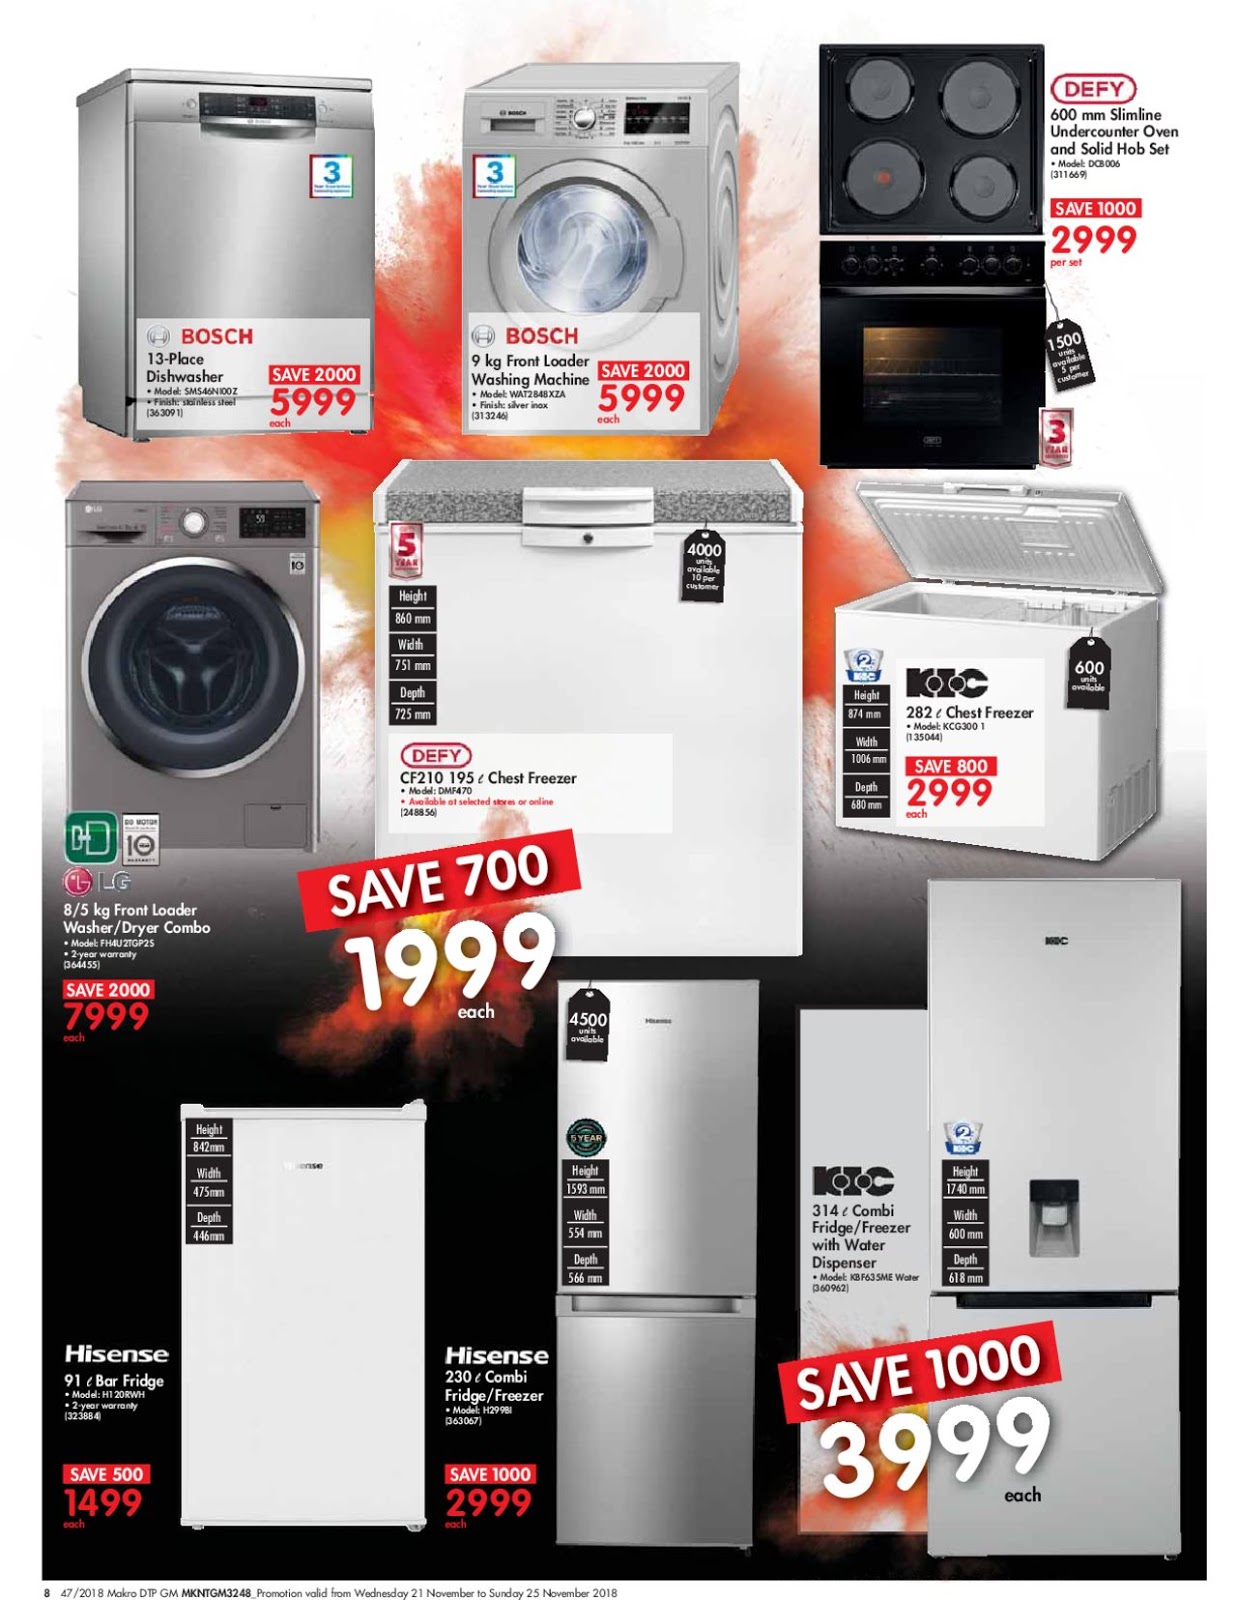 Makro Black Friday 2018 ads, Deals & Special Sales [5 Days Prices Revealed] #BlackFriday | The ...